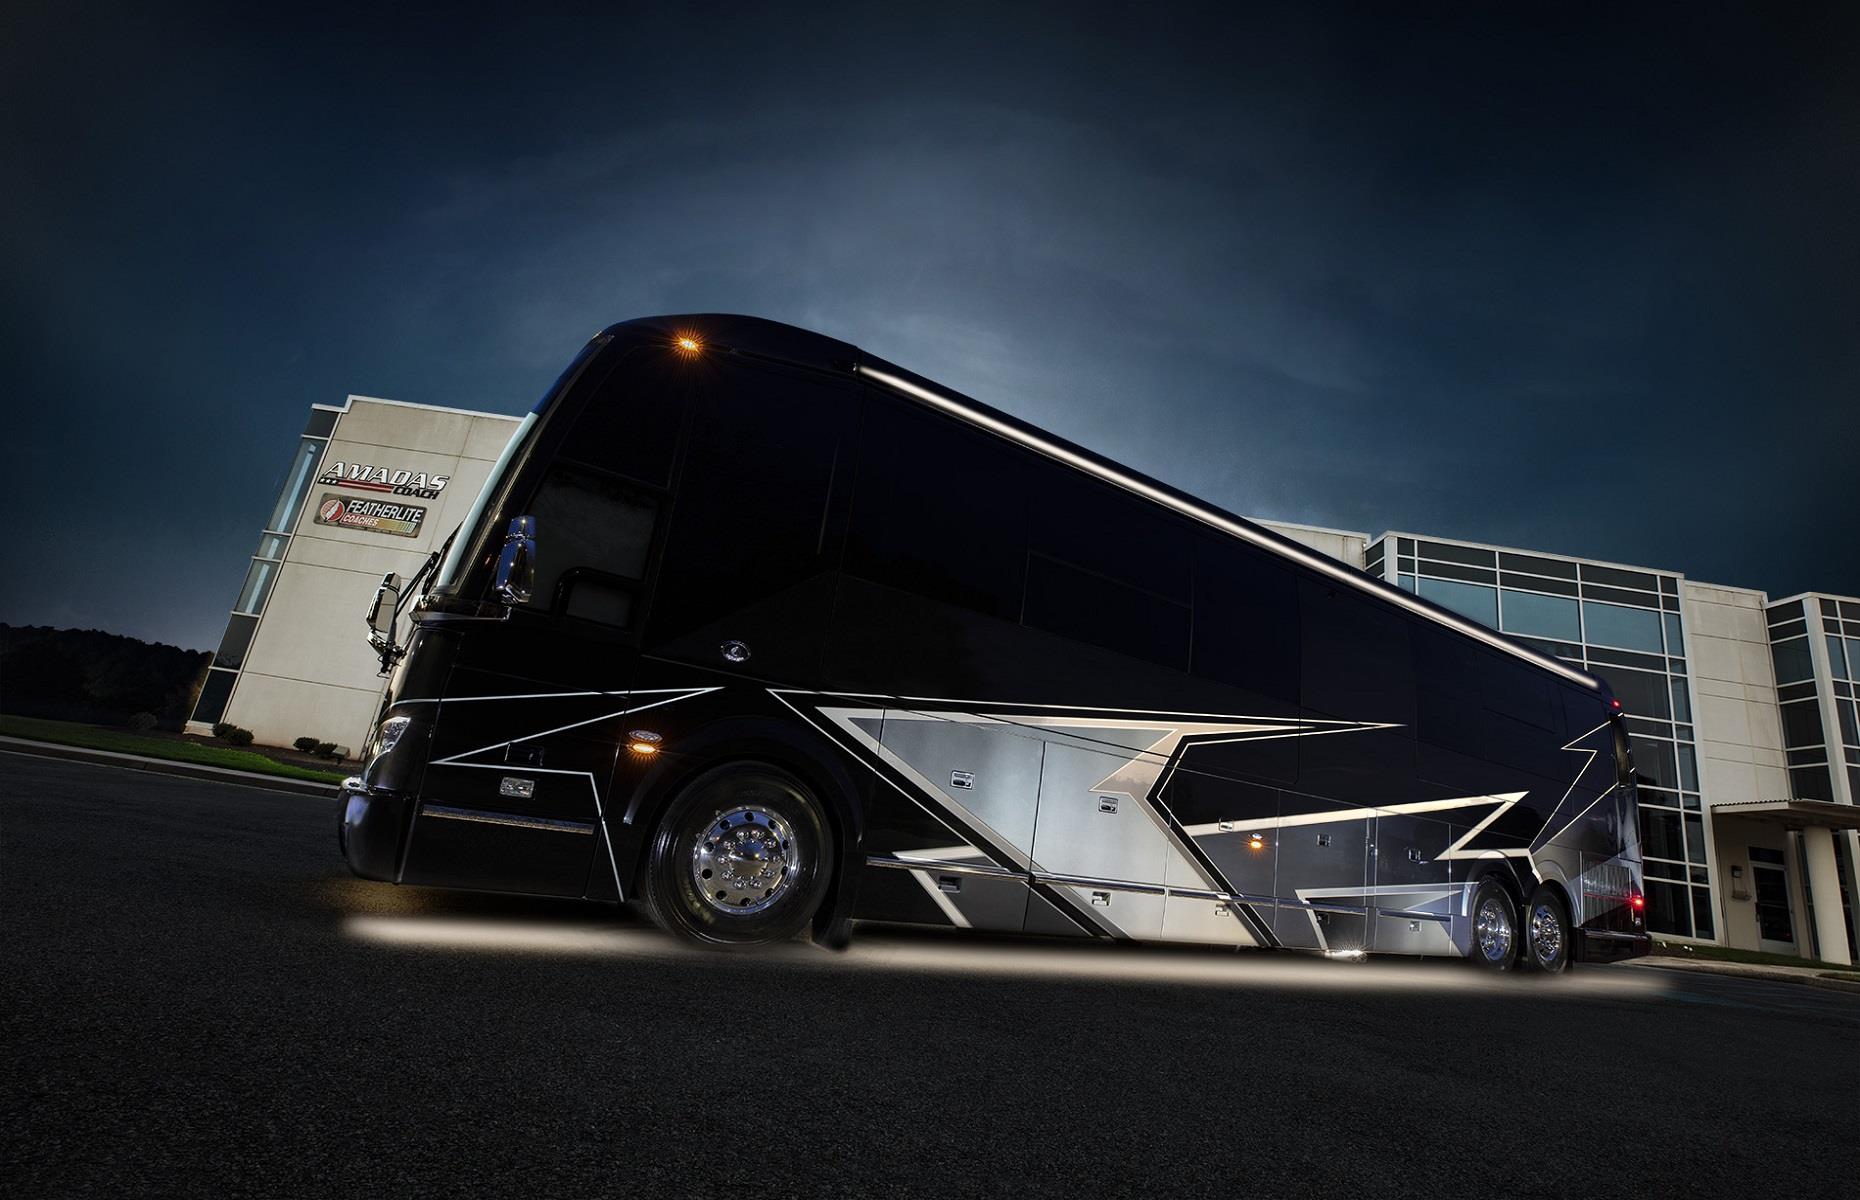 <p>Every year, Featherlite Coaches bring out new and exclusive models that keen motorhome enthusiasts can fight over. The Featherlite Vantaré Prevost Coach 1148 "Zion" (pictured) was one such model and quickly sold. Now, the <a href="https://www.featherlitecoaches.com/archives/inventory/2024-featherlite-coaches-1480">Prevost H 1480</a> is here and while its design is still being perfected, buyers can expect to find the same elegant design features and smart technology as the Zion. </p>